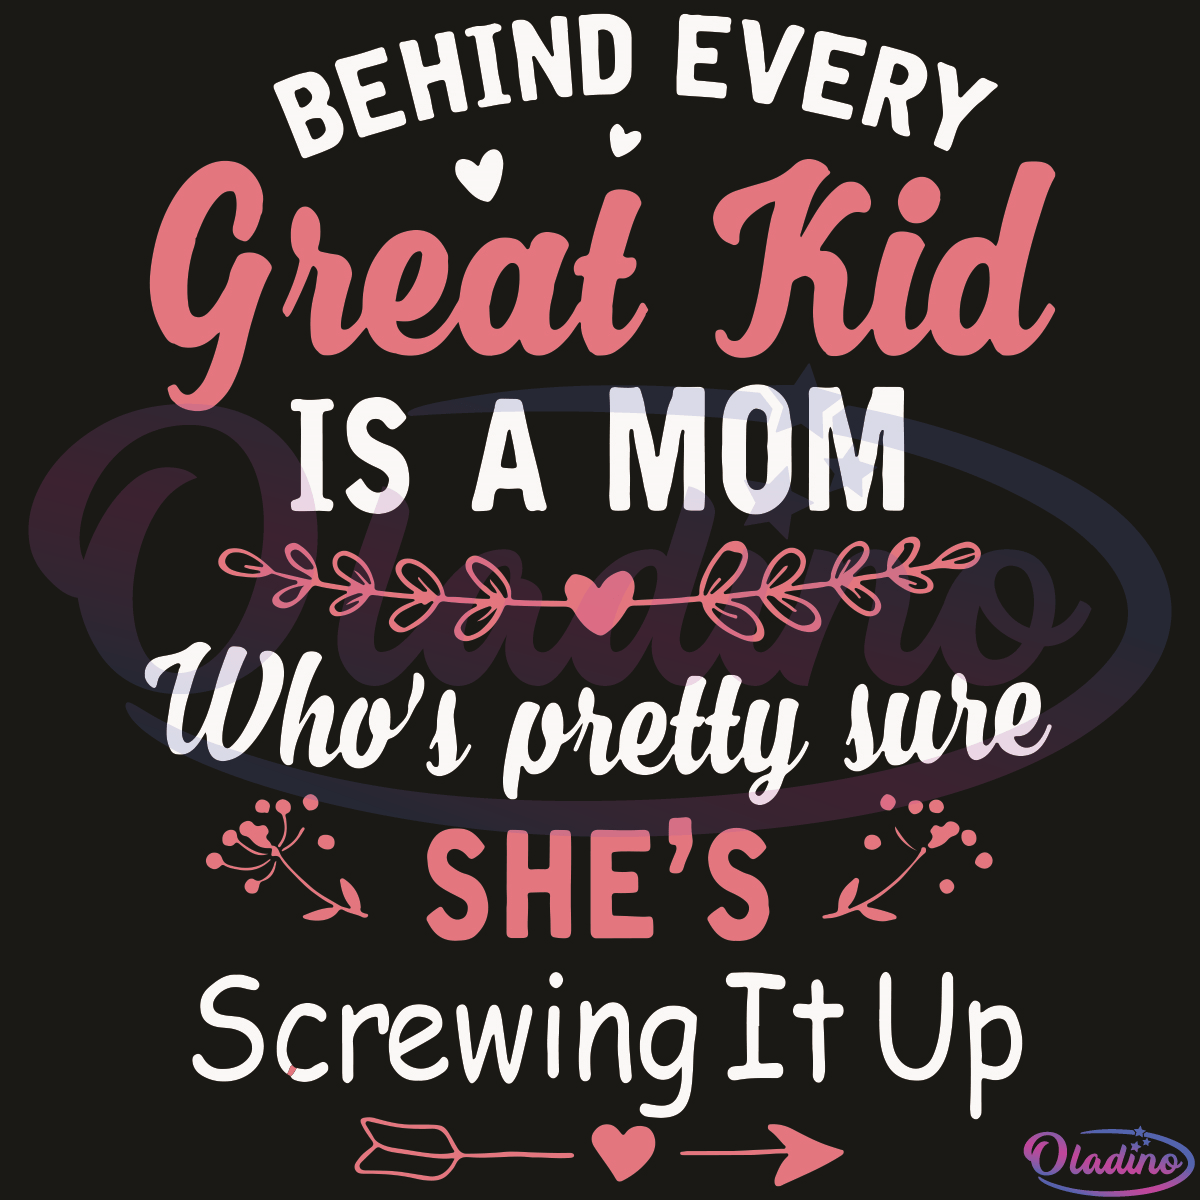 Behind Every Great Kid Is A Mom SVG Digital File, Mothers Day SVG